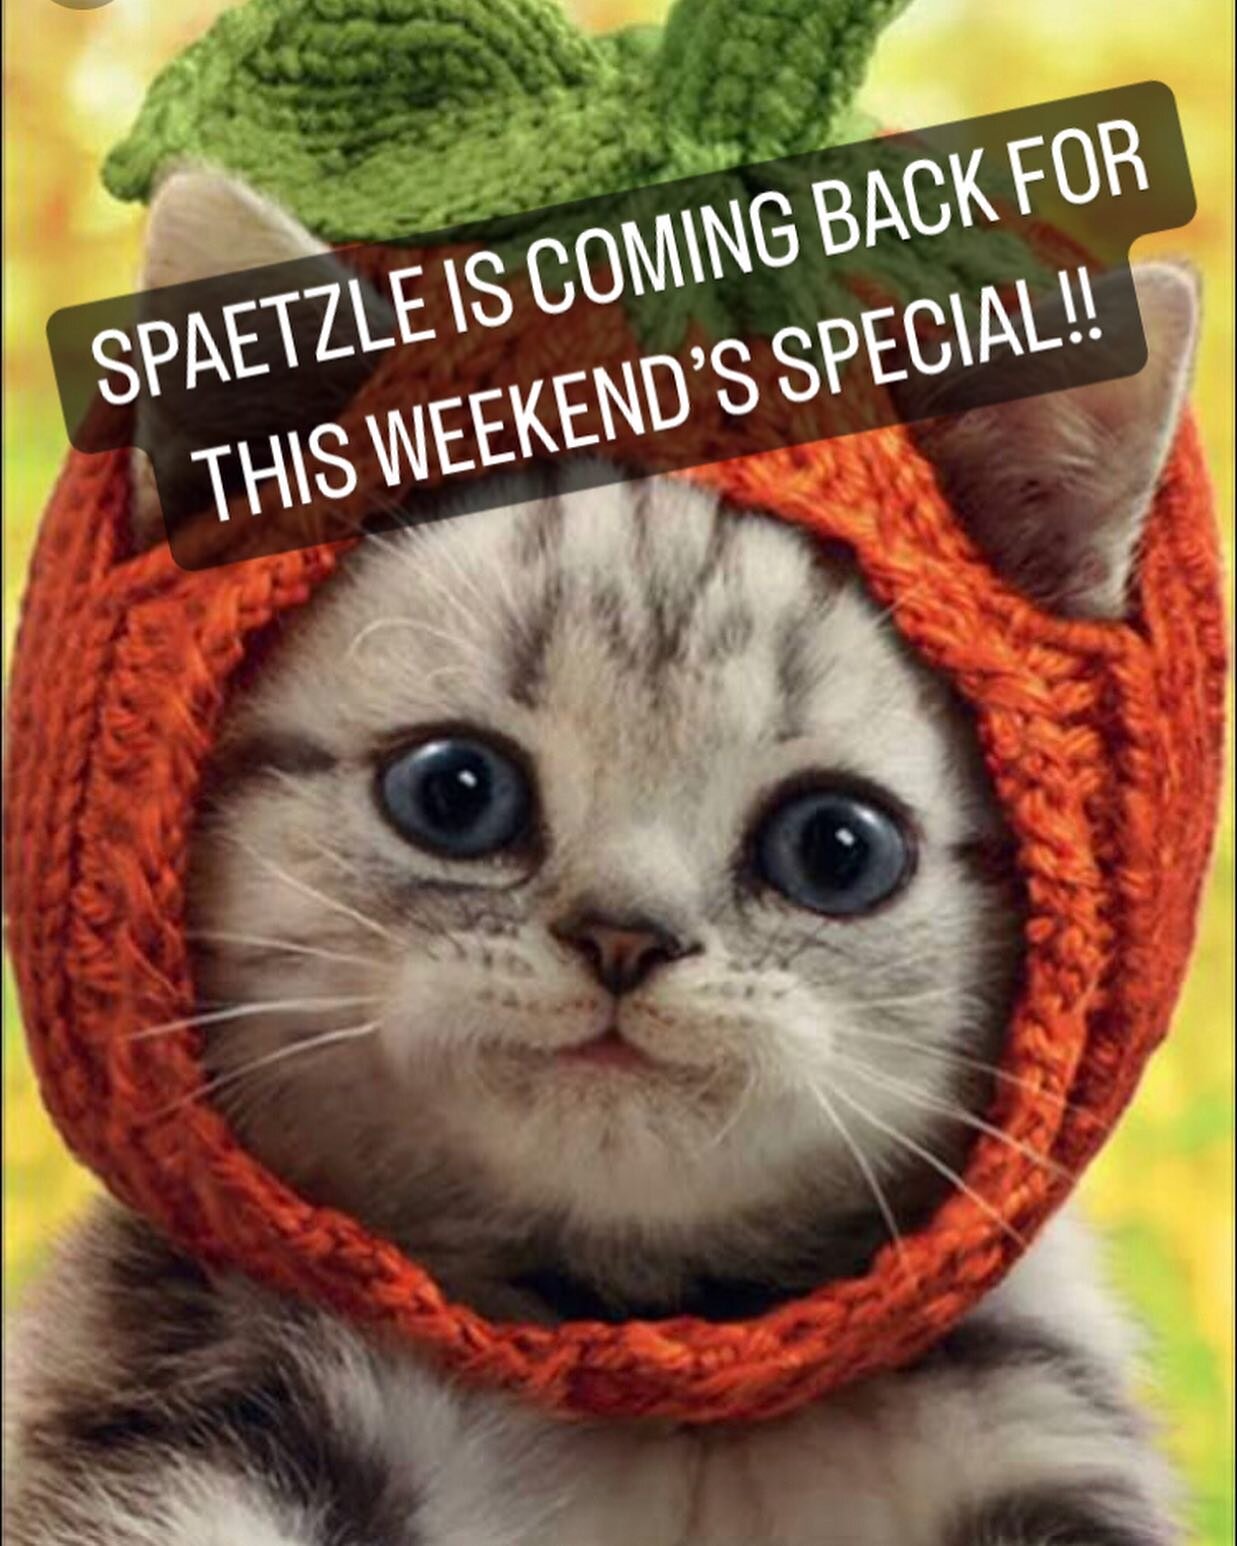 SPAETZLE IS BACK THIS WEEKEND!! One of our most requested dishes is making a comeback fresh pesto style, delicious and vegetarian!! Come see us 8am-1pm and don&rsquo;t miss out!  #spaetzle#pdxfood#pdxfoodie#fressenpdx#eaterpdx#pdxeater#brunch#brunchs